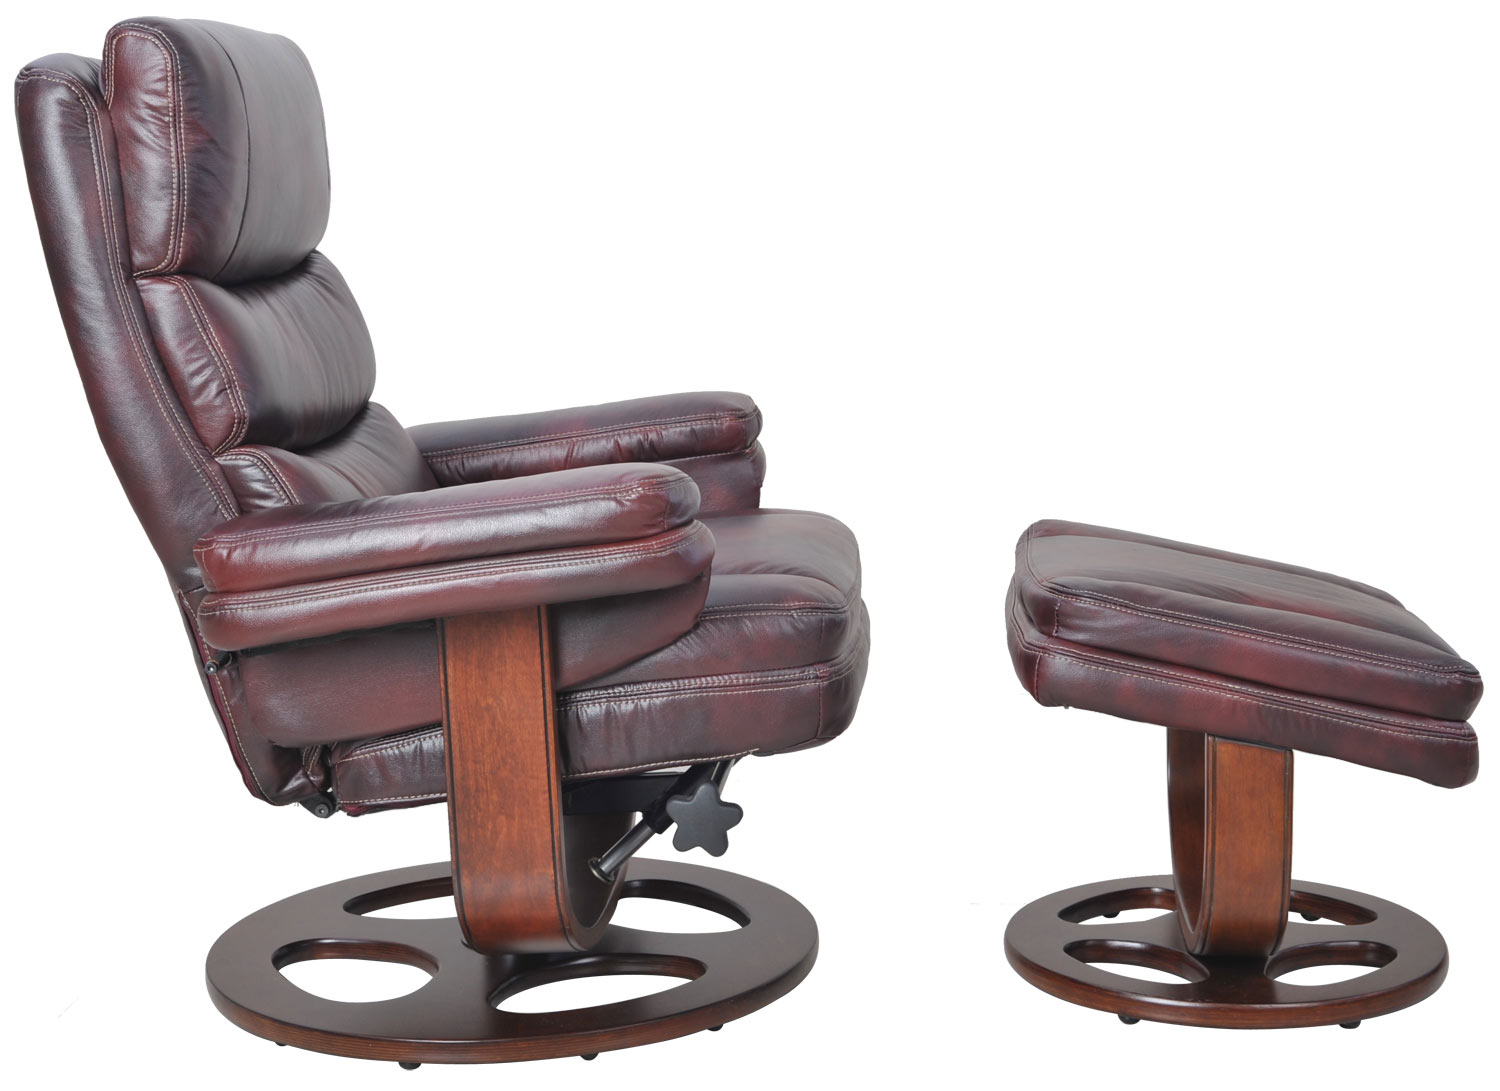 Barcalounger Bella Pedestal Recliner Chair and Ottoman - Plymouth Mahogany/Leather Match